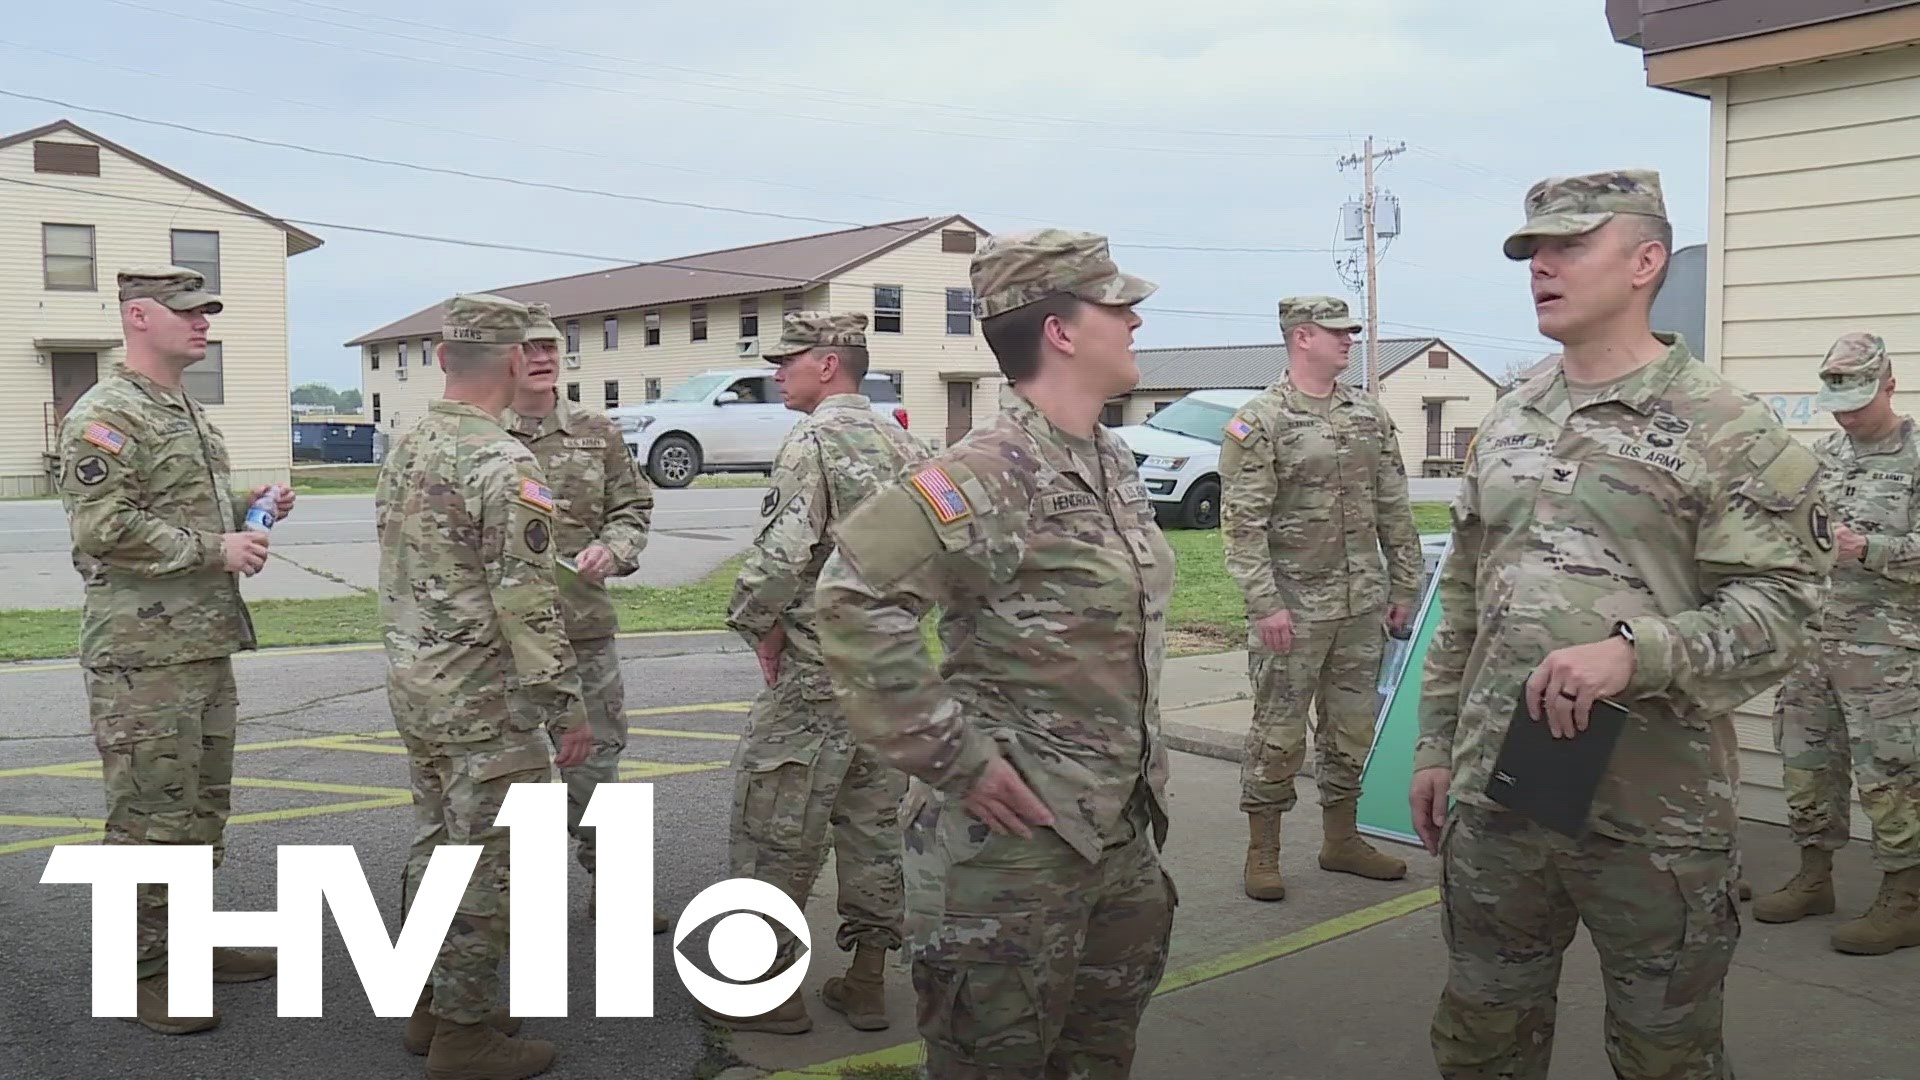 On April 1, 40 guardsmen with the Arkansas National Guard were officially deployed to support the Texas National Guard combat issues on the southern border.